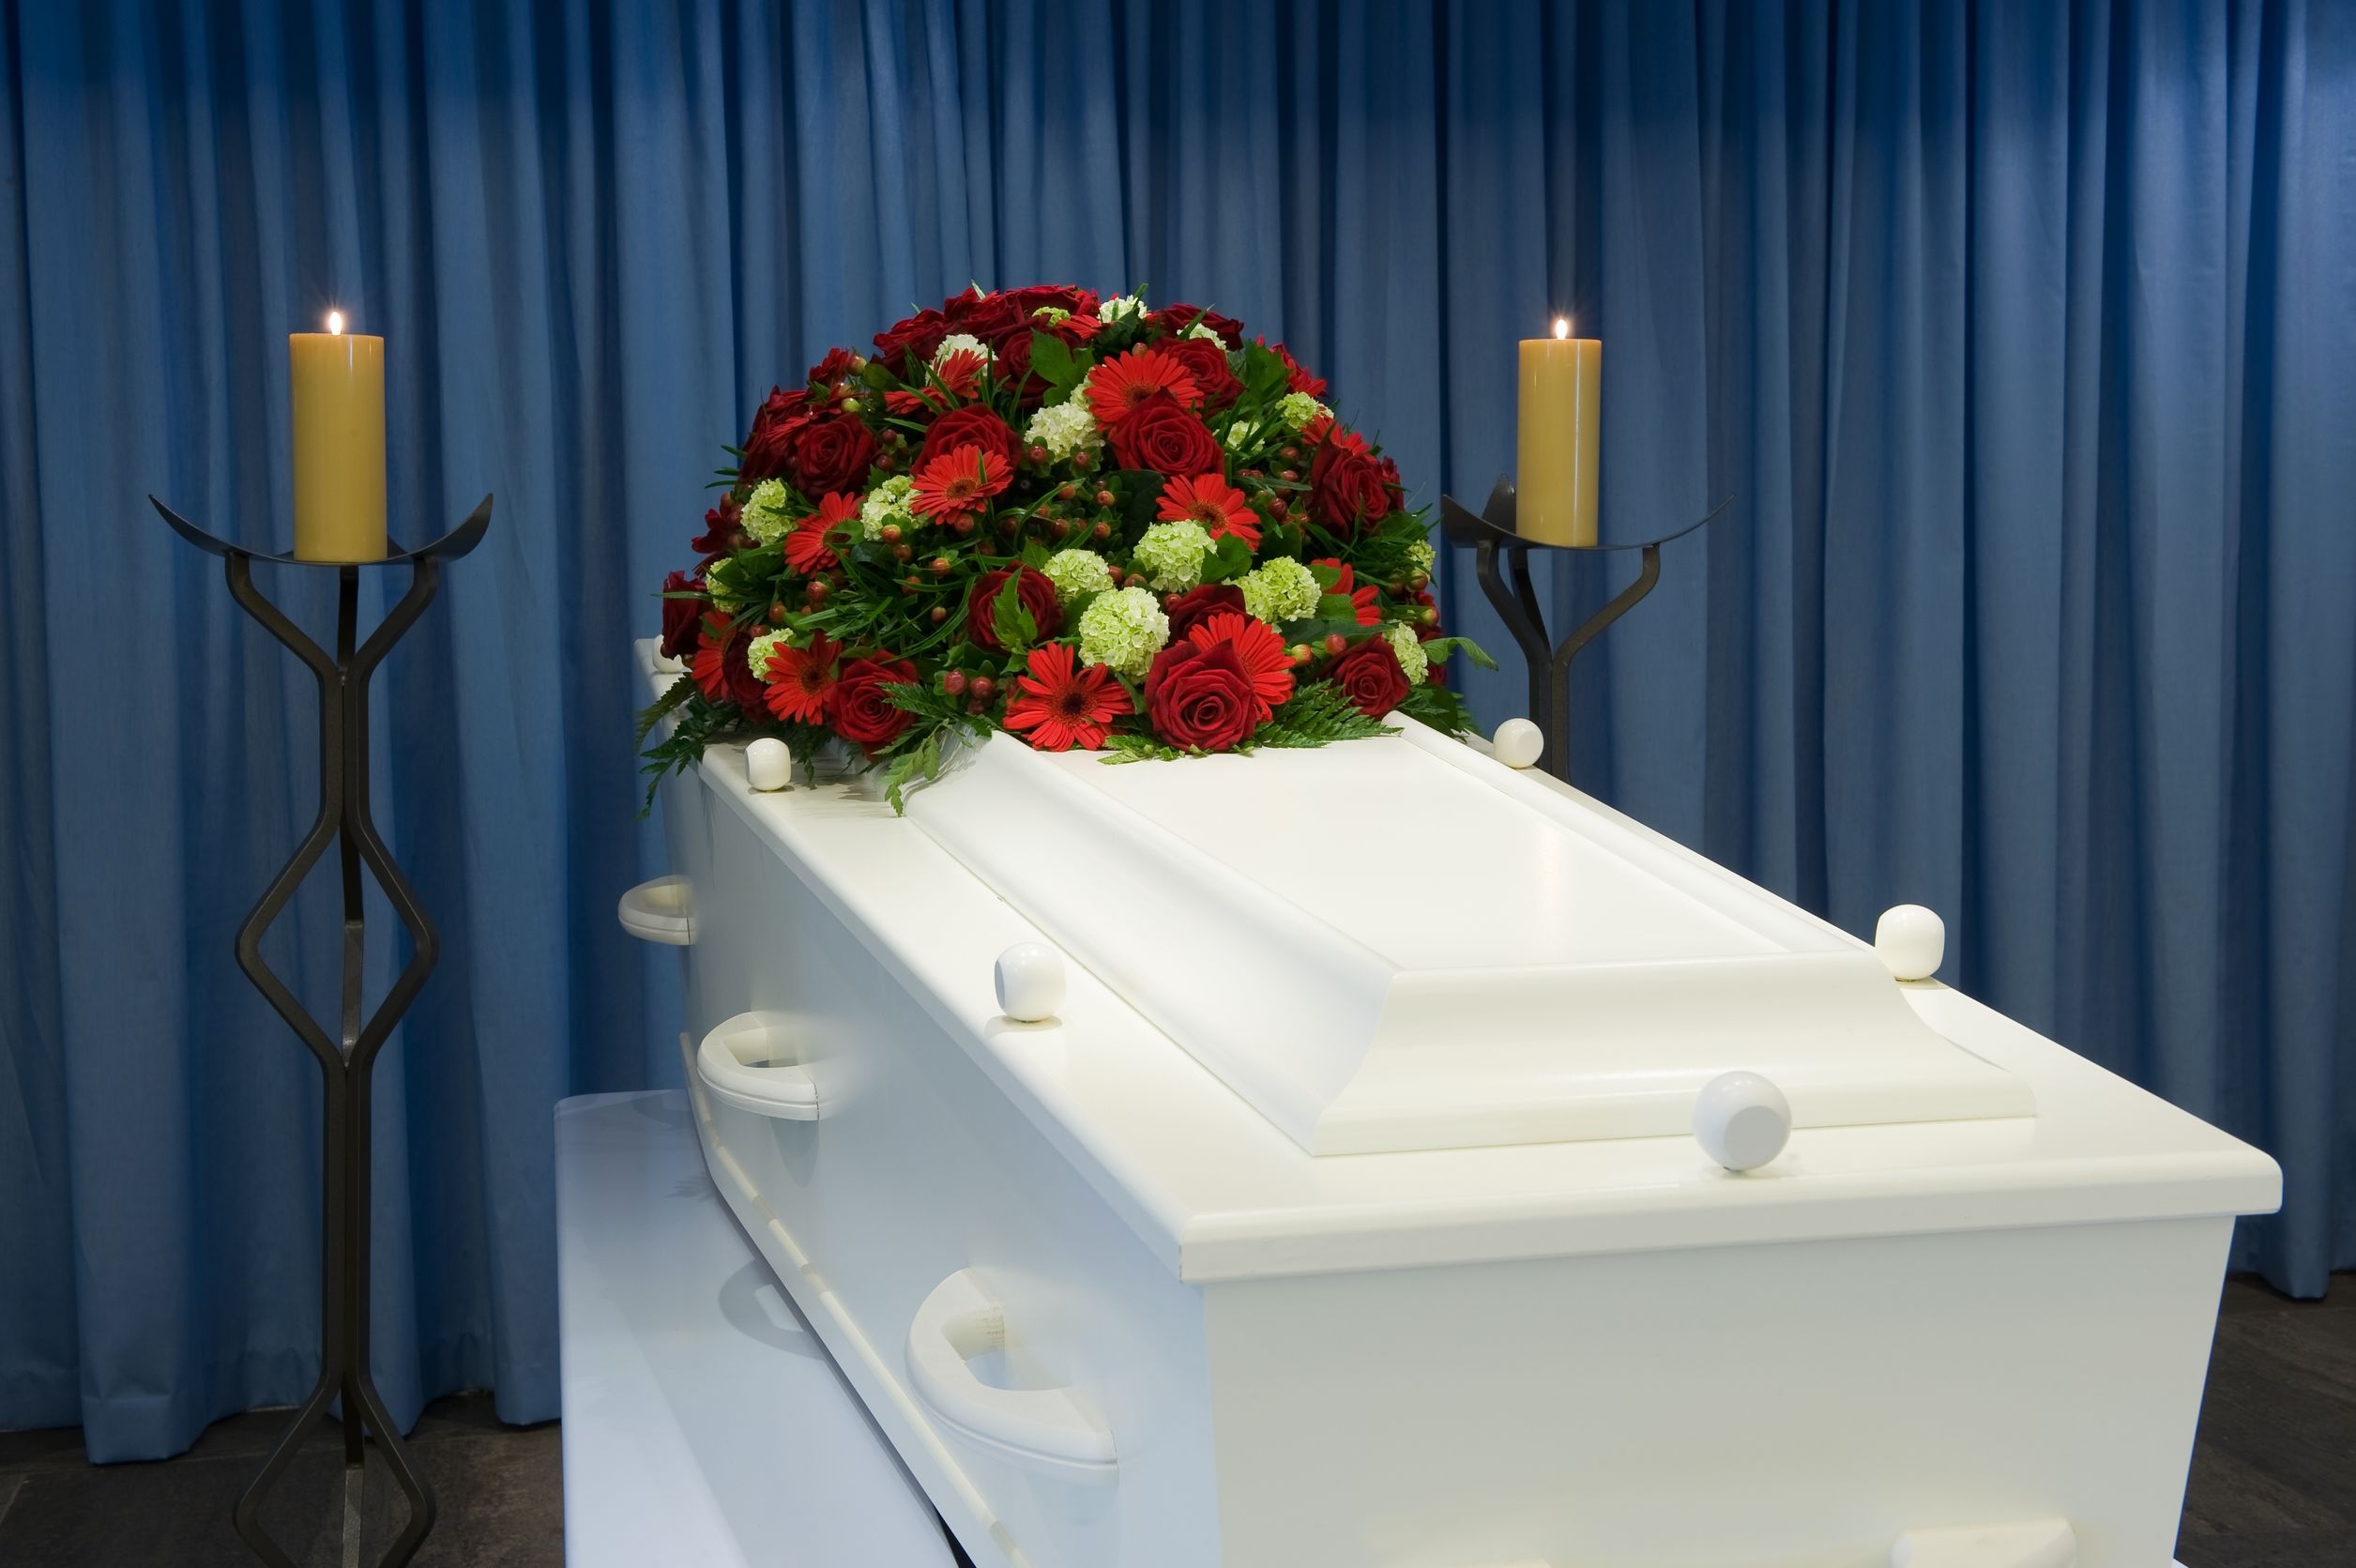 What Types of Veteran Funeral Services Are Available in Woodland, CA?